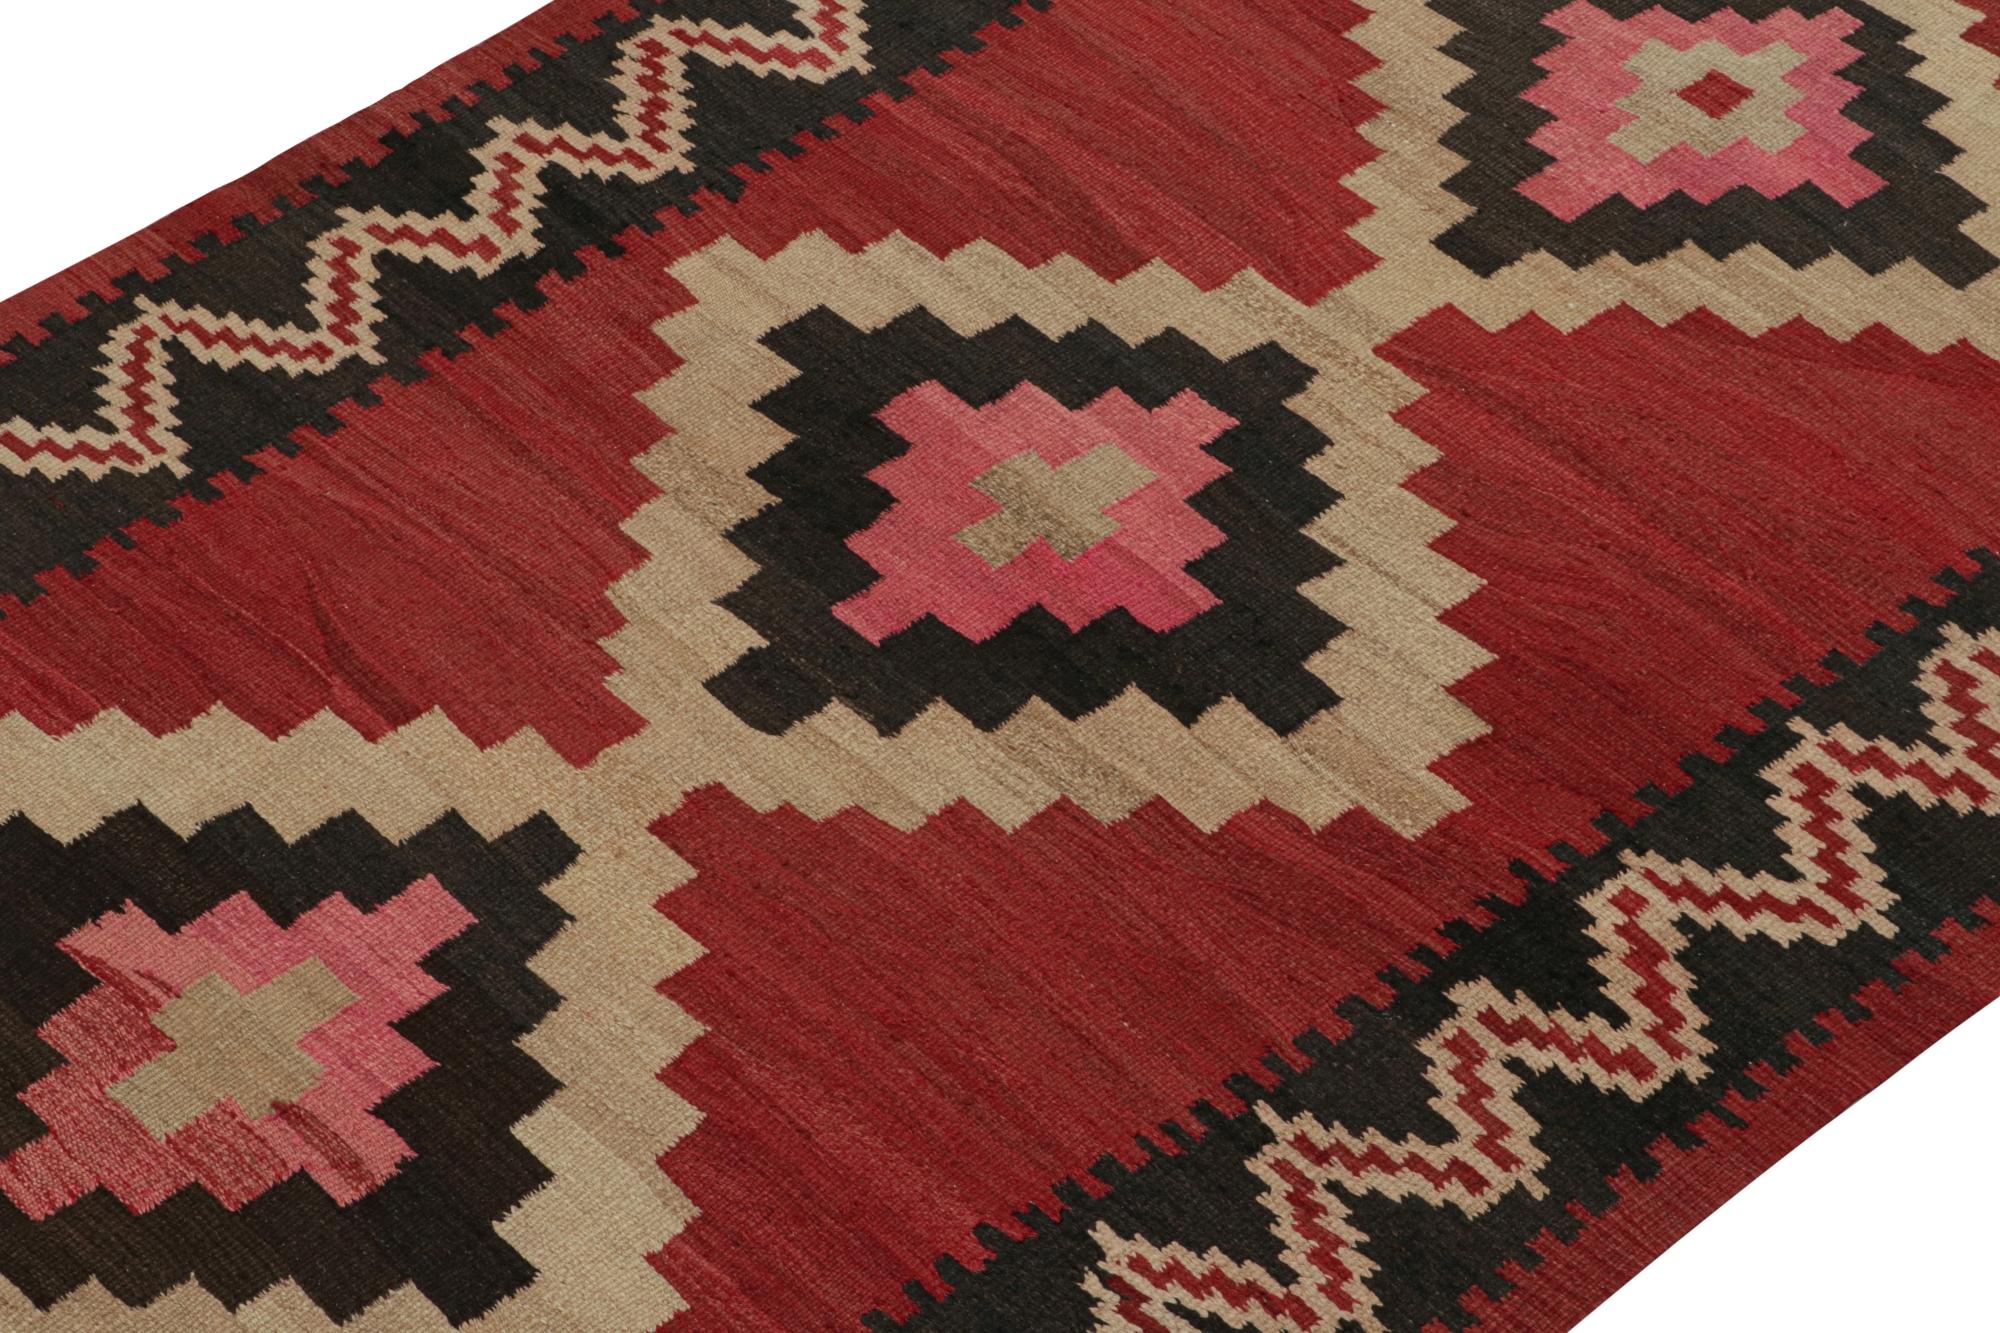 This vintage 5x7 Persian Kilim is believed to be a midcentury Shahsavan rug, handwoven in wool circa 1950-1960.

On the Design: 

This traditional tribal rug enjoys pink and beige-brown medallions on a rich red open field. Connoisseurs will note